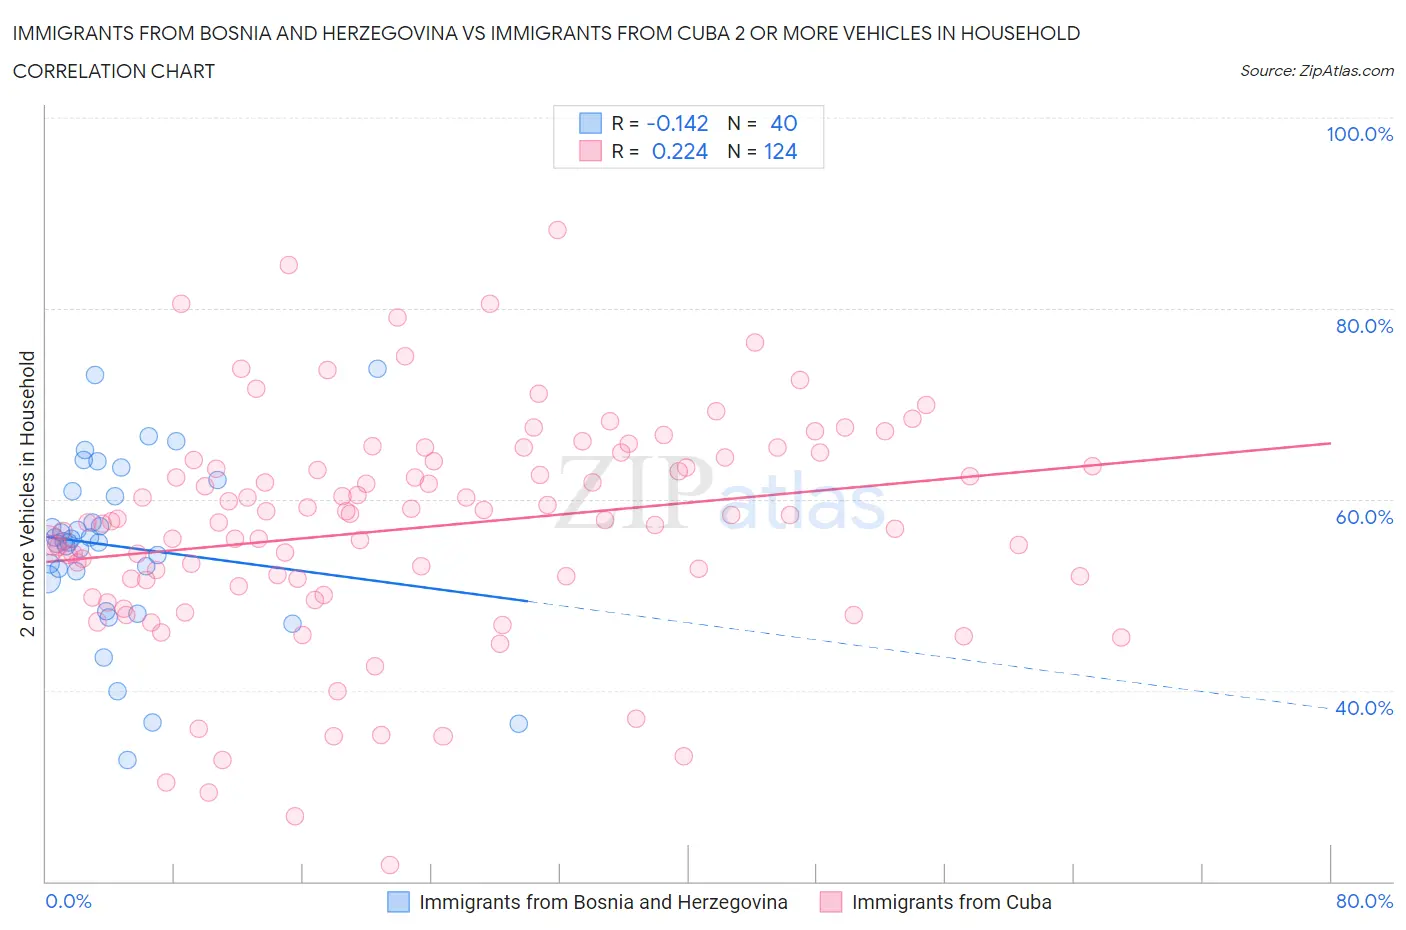 Immigrants from Bosnia and Herzegovina vs Immigrants from Cuba 2 or more Vehicles in Household